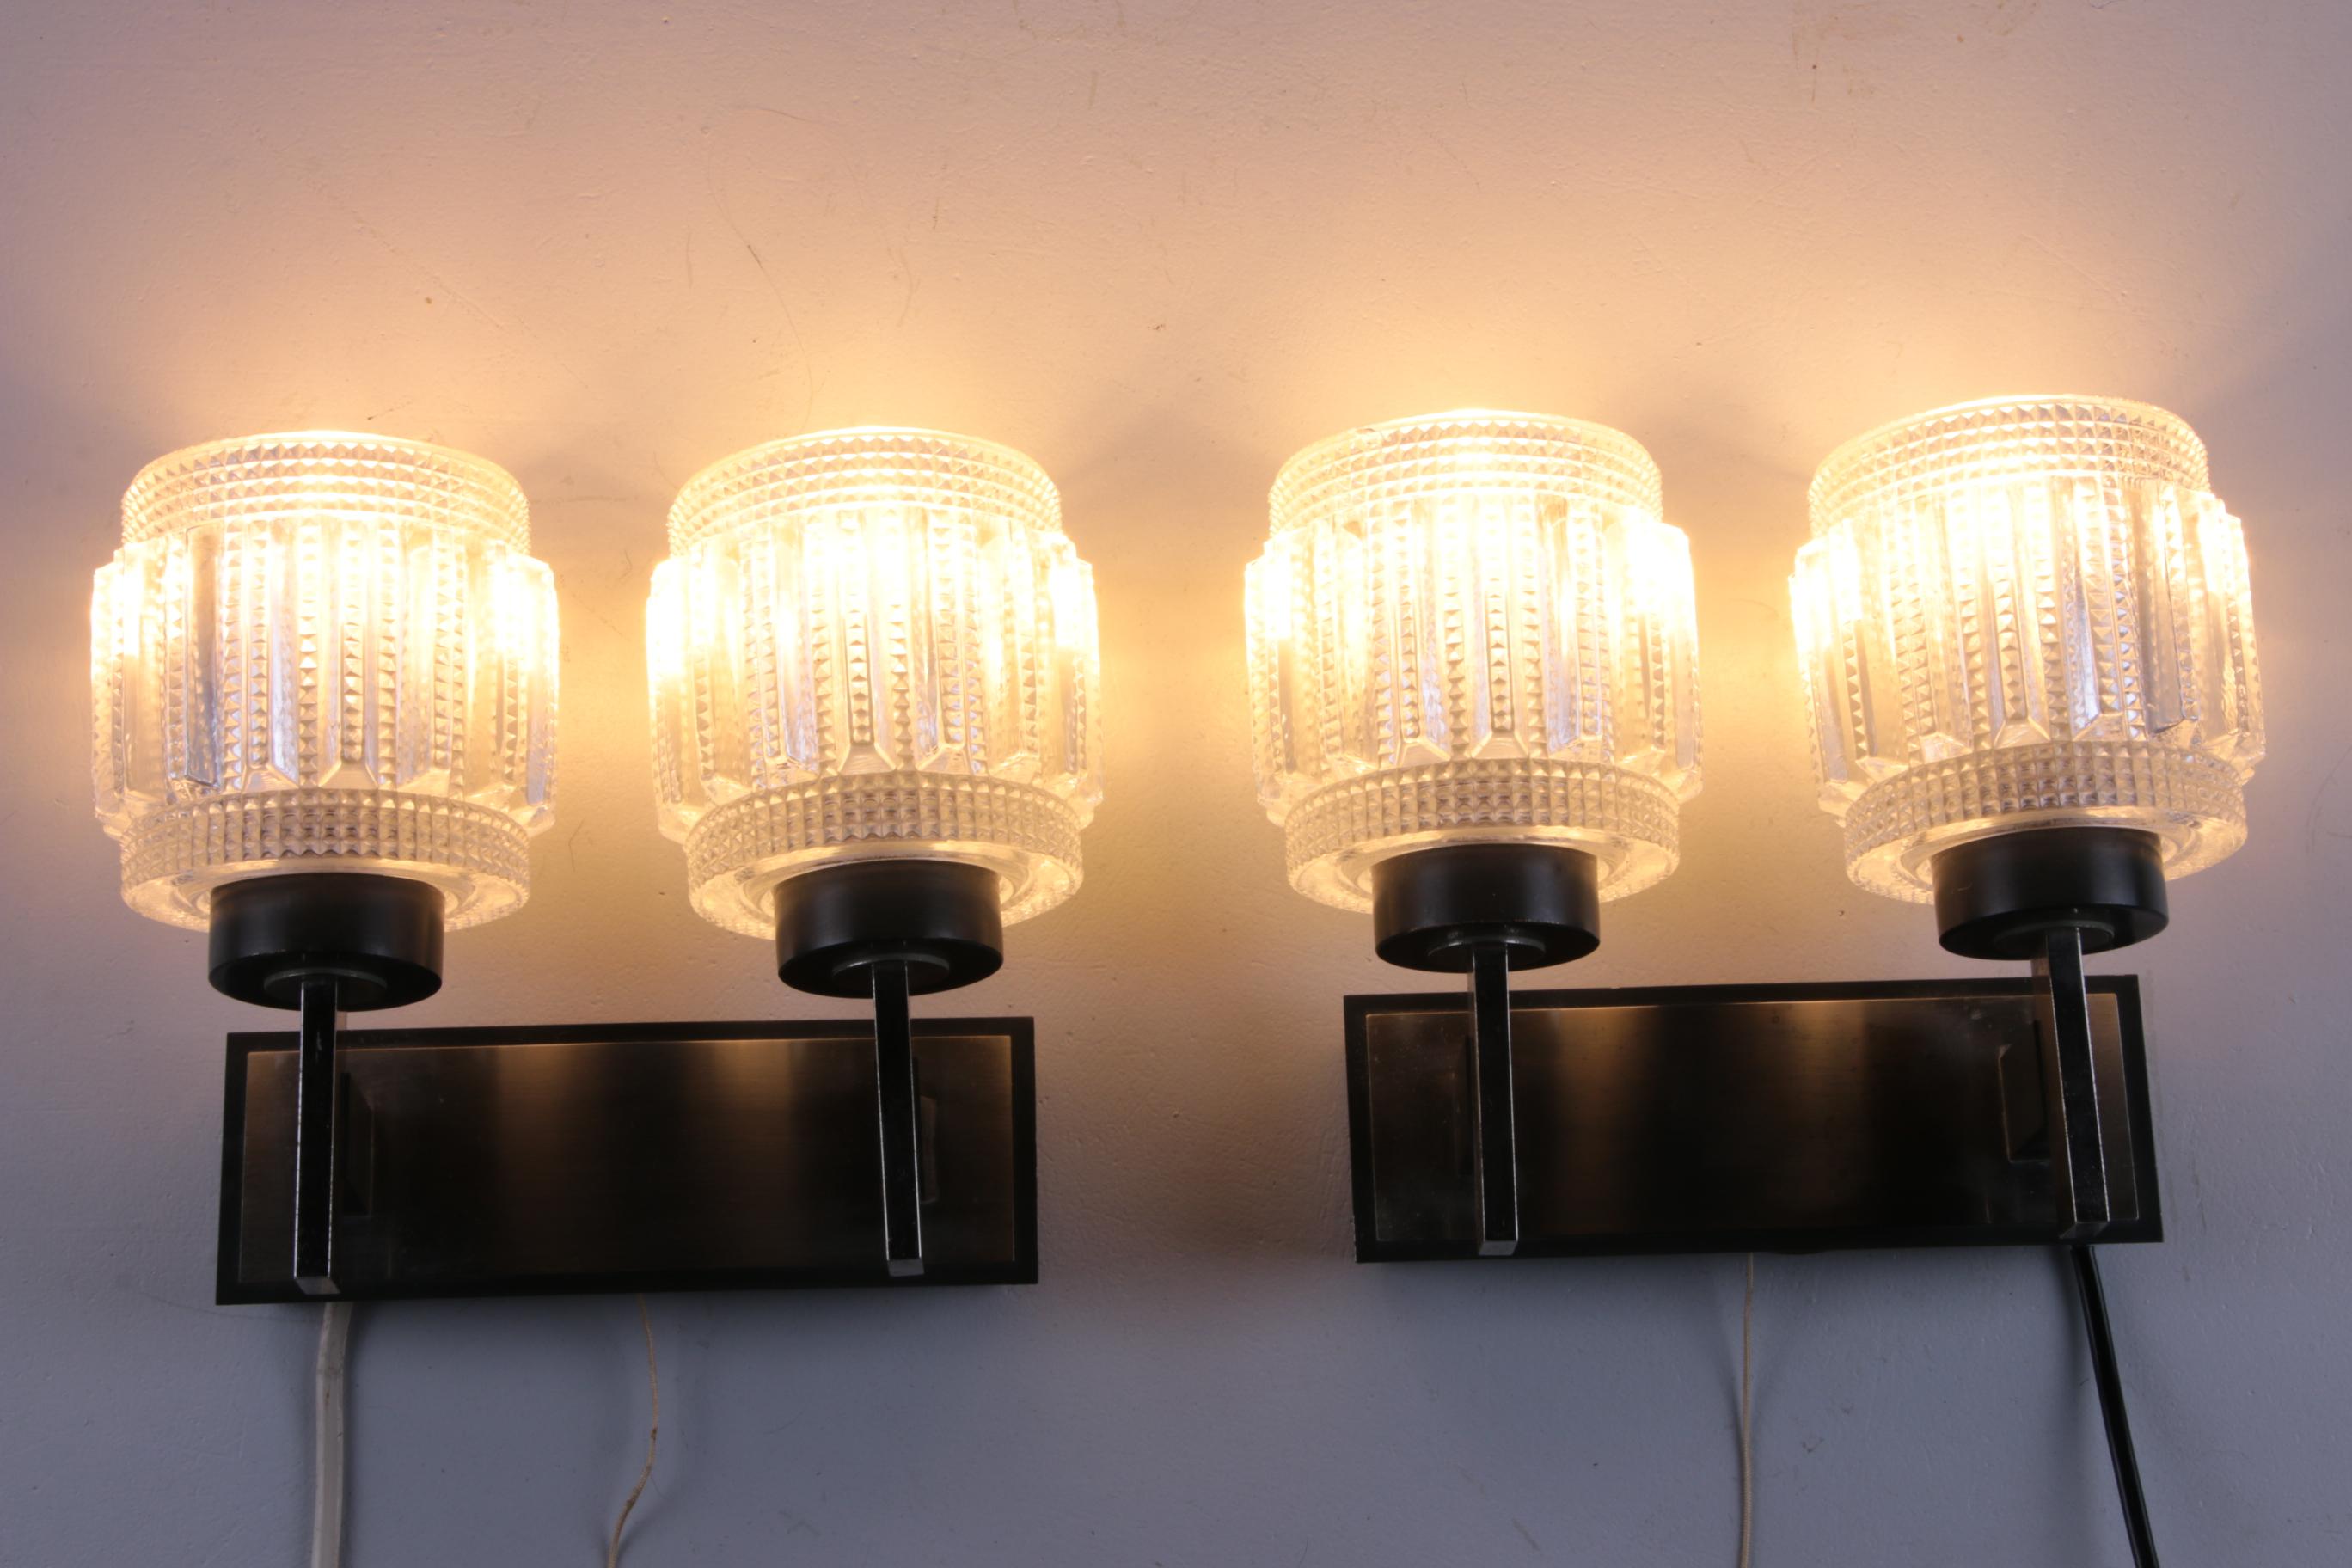 A set of two beautifully and stylishly designed wall lamps by Neuhaus Leuchten. You don't come across this model very often. And certainly not two.

The lamps have a pull cord for switching the lamp on and off.

The lamps have sleek glass caps